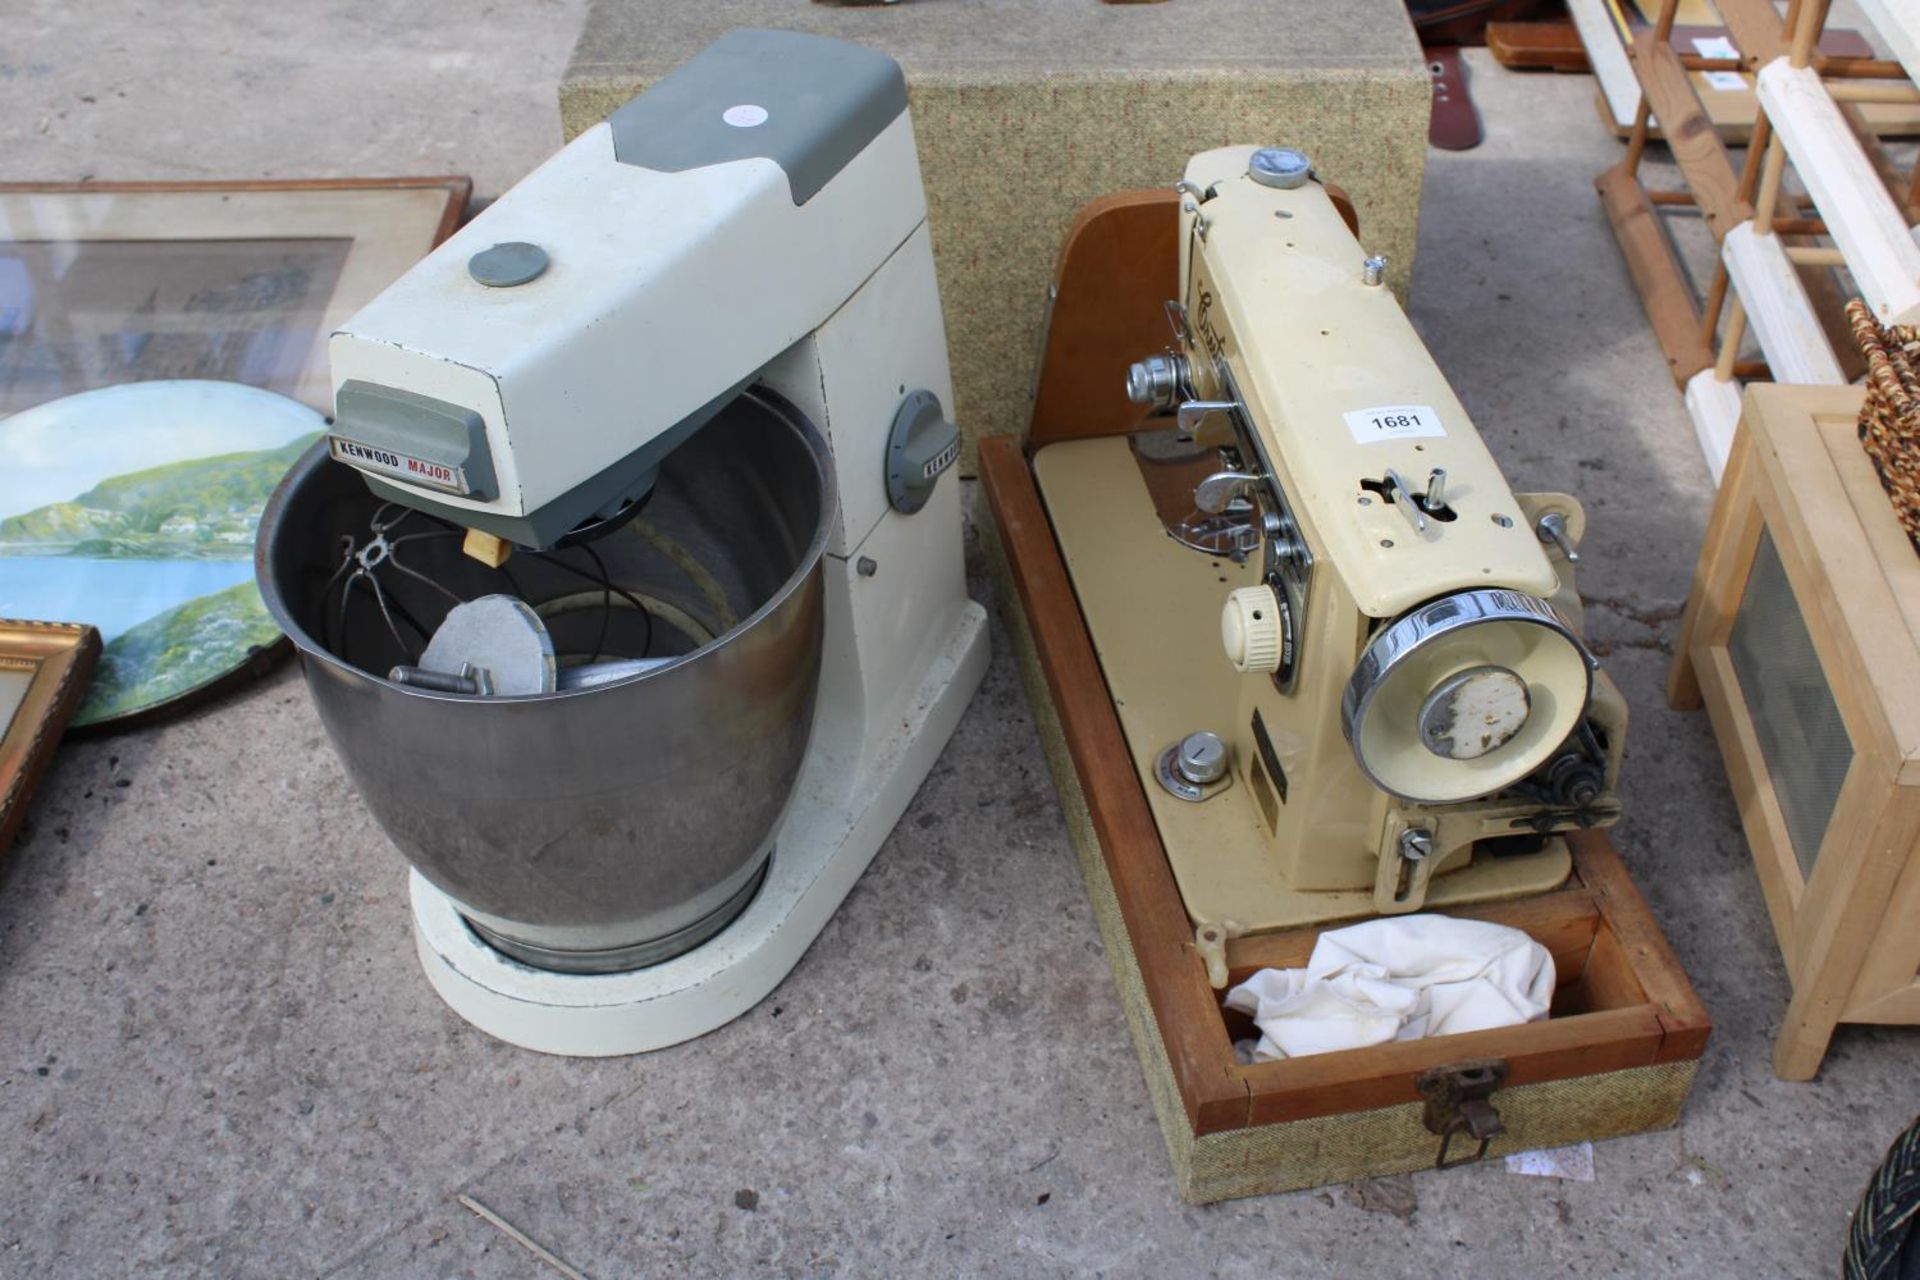 A RETRO KENWOOD FOOD MIXER AND A CRESTA SEWING MACHINE WITH CARRY CASE - Image 2 of 3